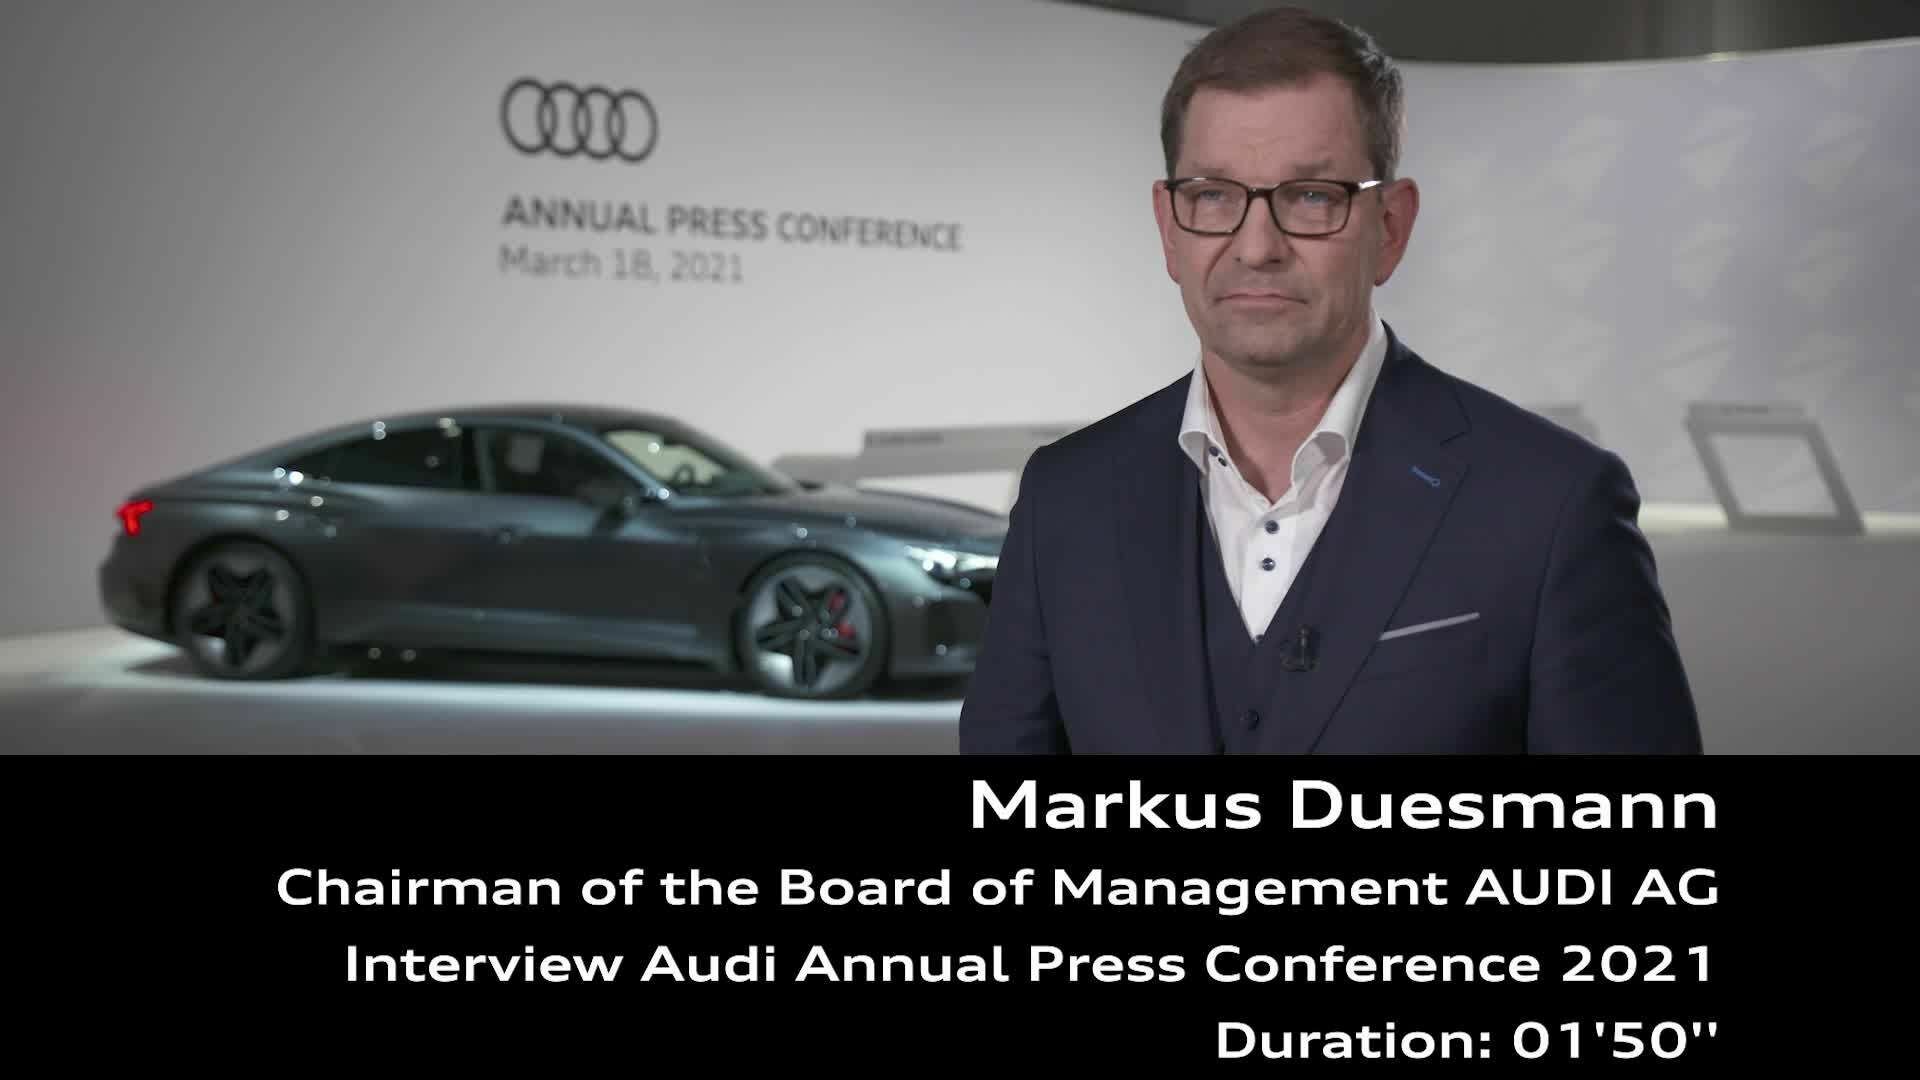 Interview: Markus Duesmann on the occasion of the Audi Annual Press Conference 2021